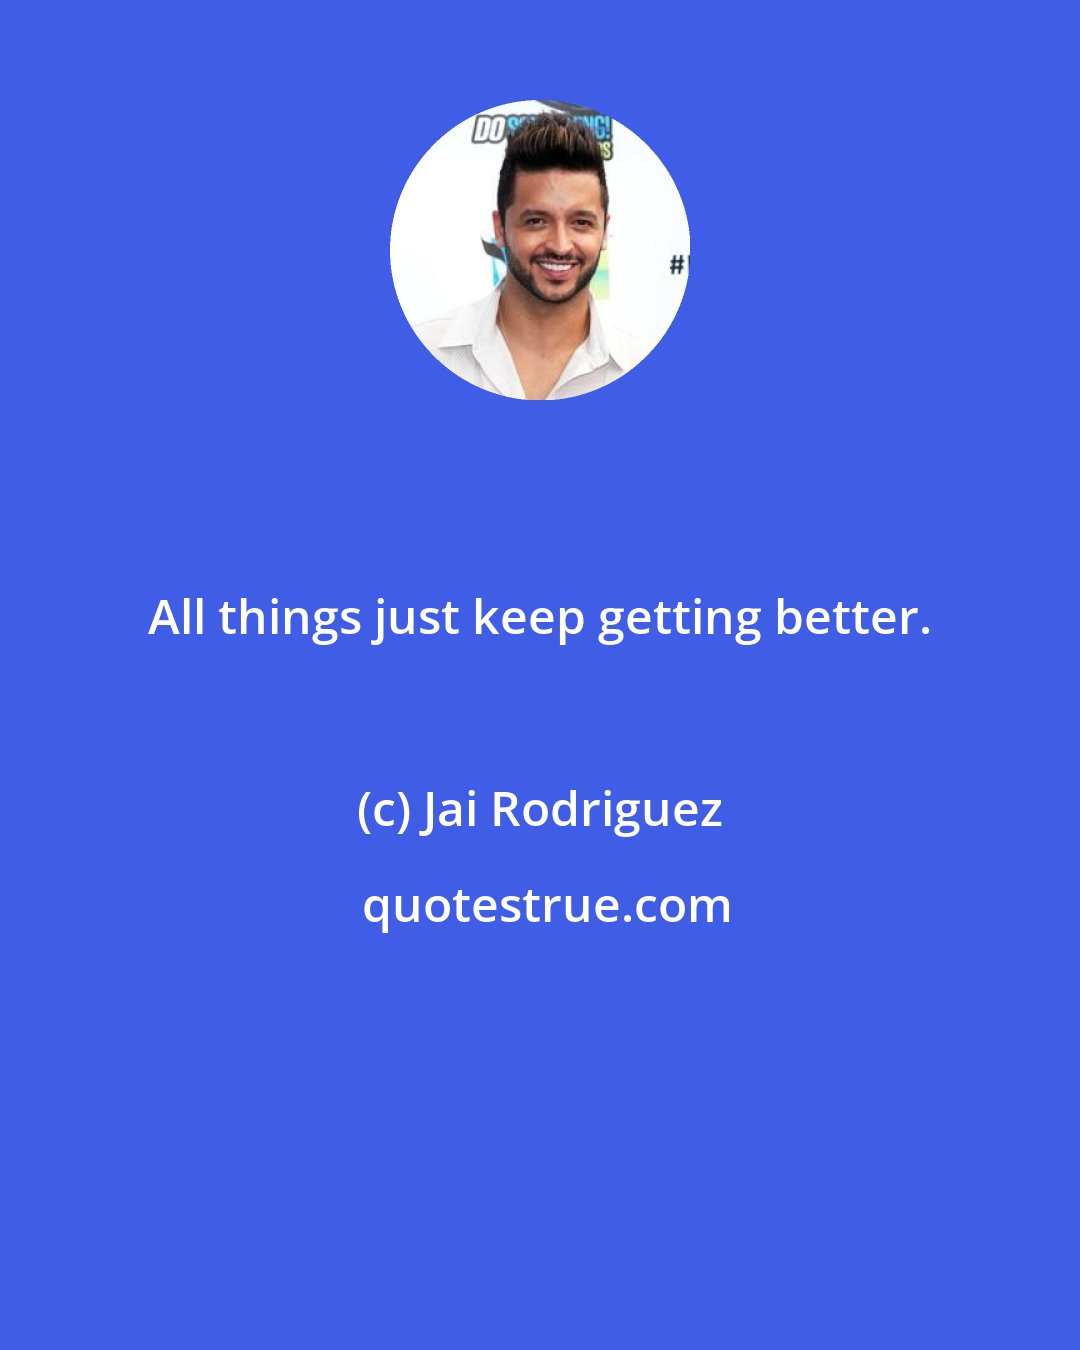 Jai Rodriguez: All things just keep getting better.